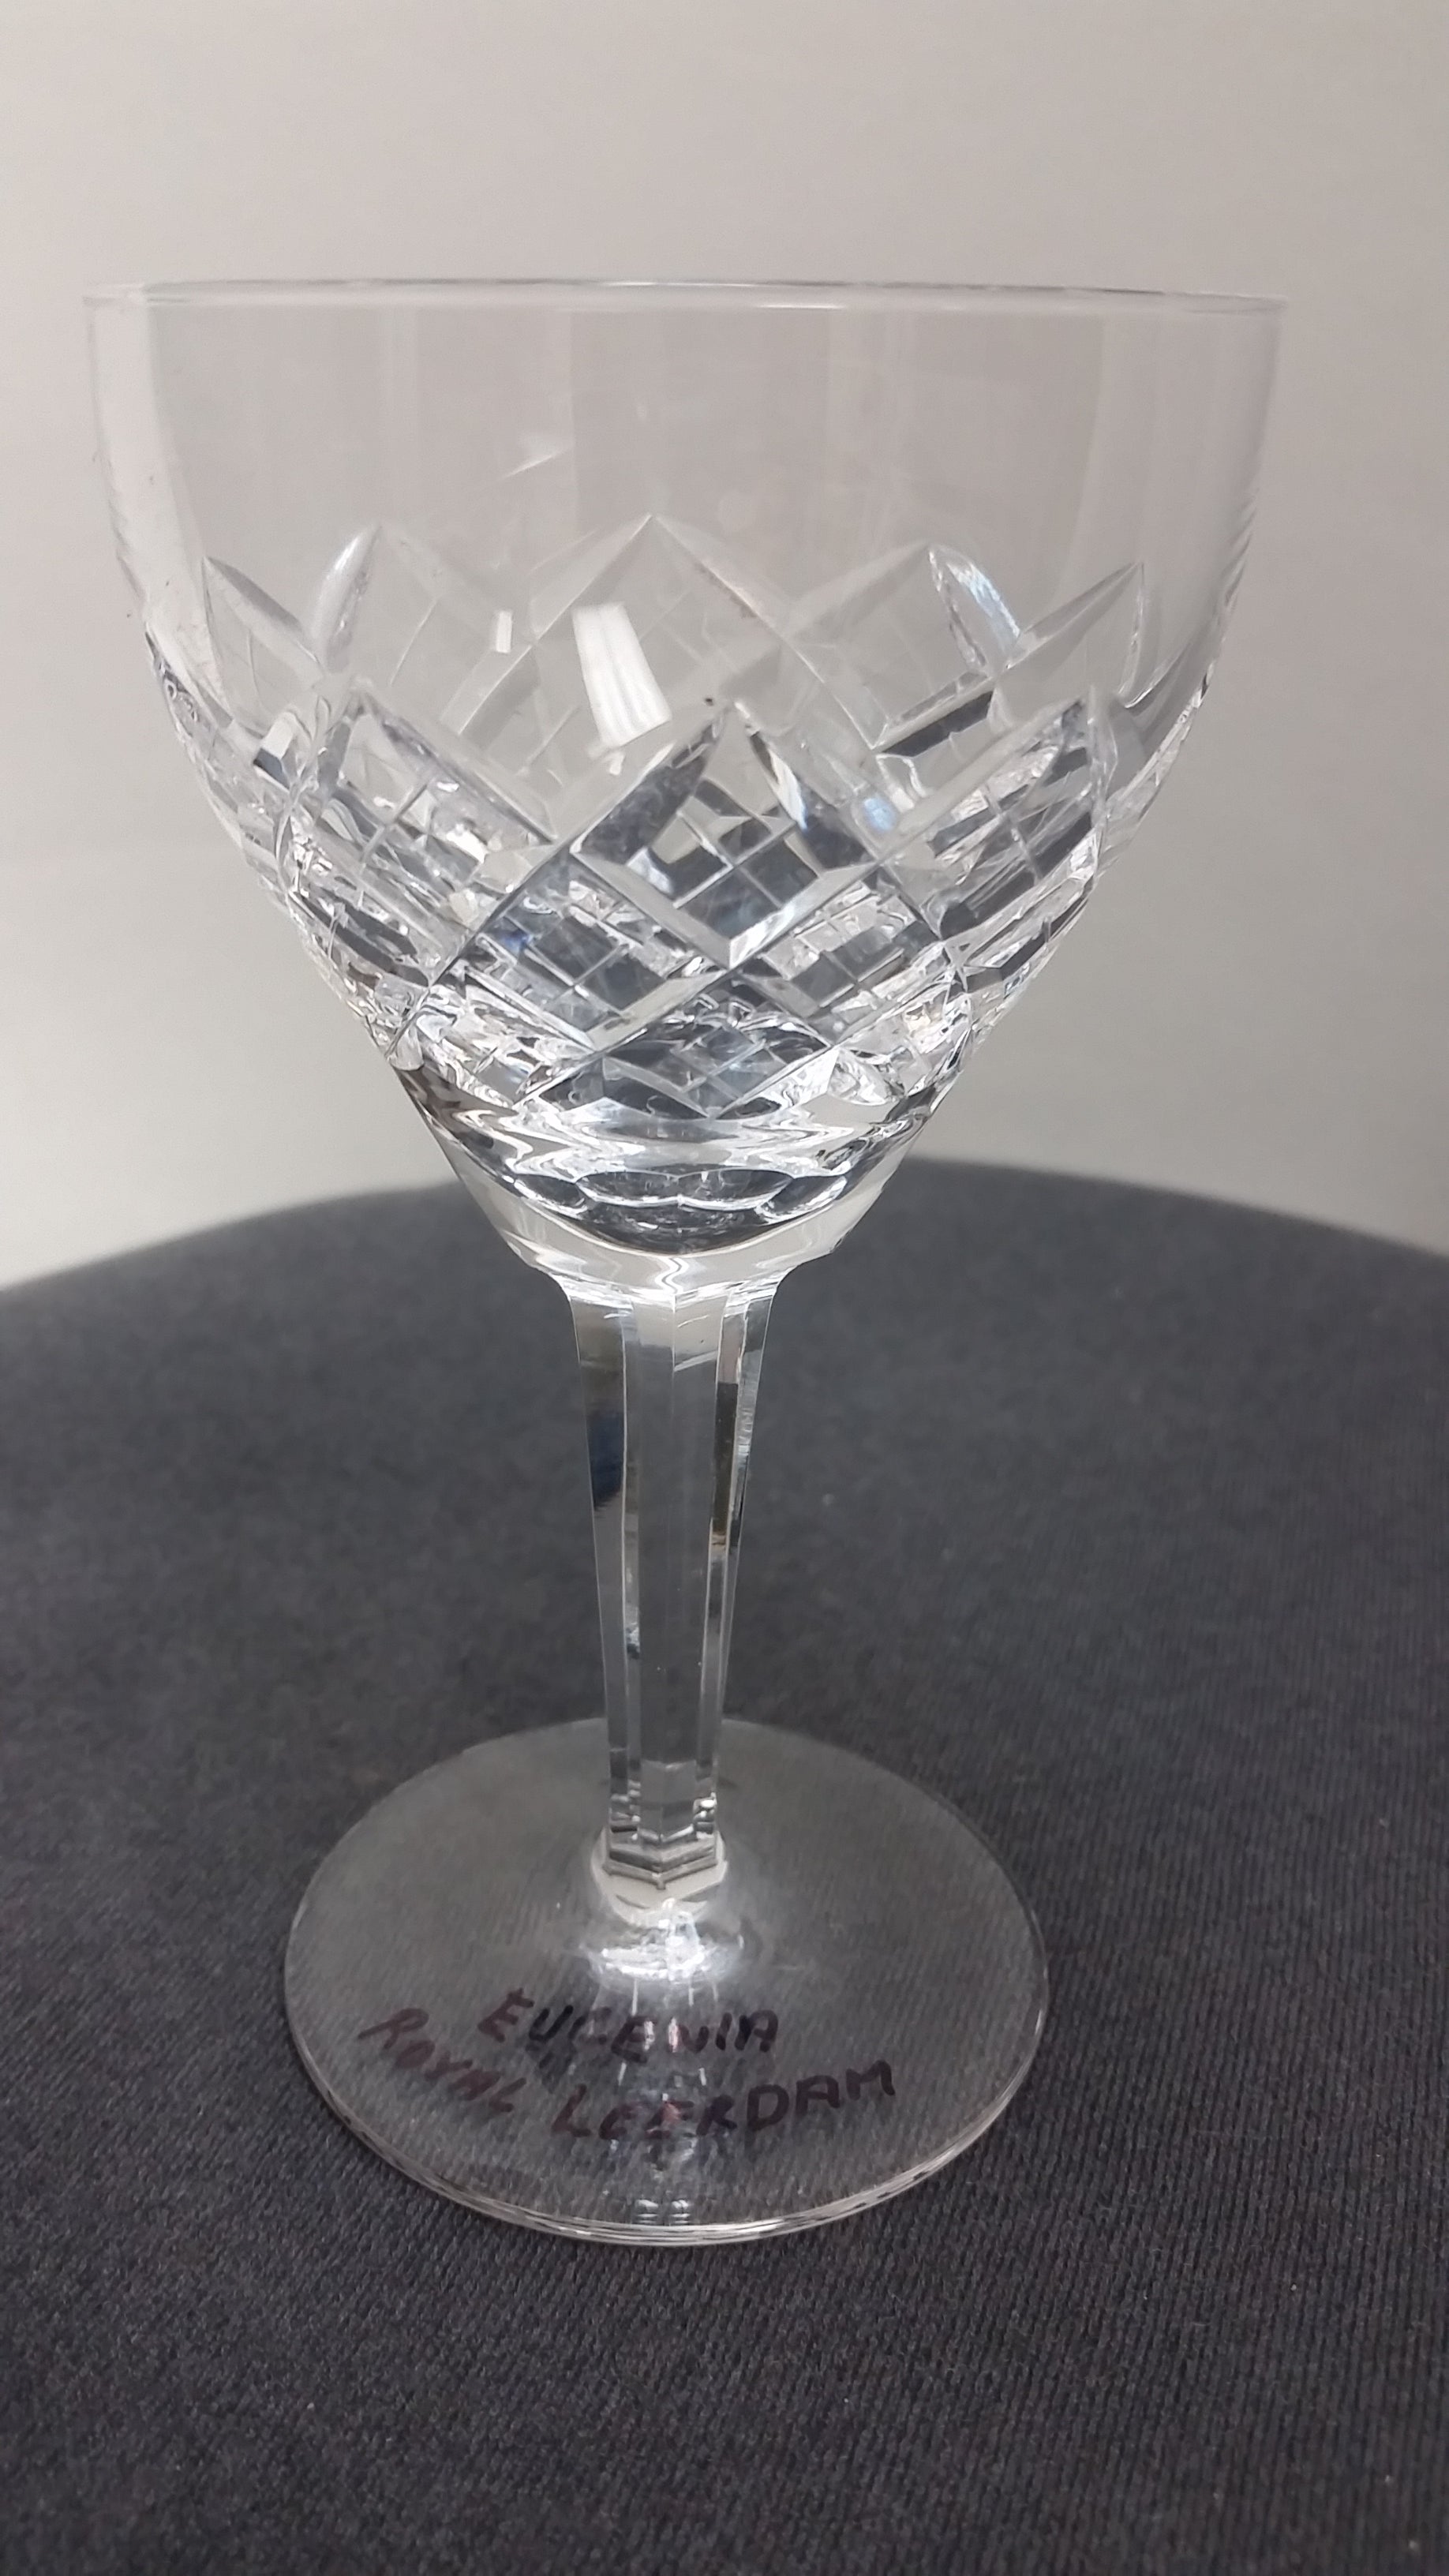 Eugenia Royal Leerdam wine glasses - O'Rourke crystal awards & gifts abp cut glass